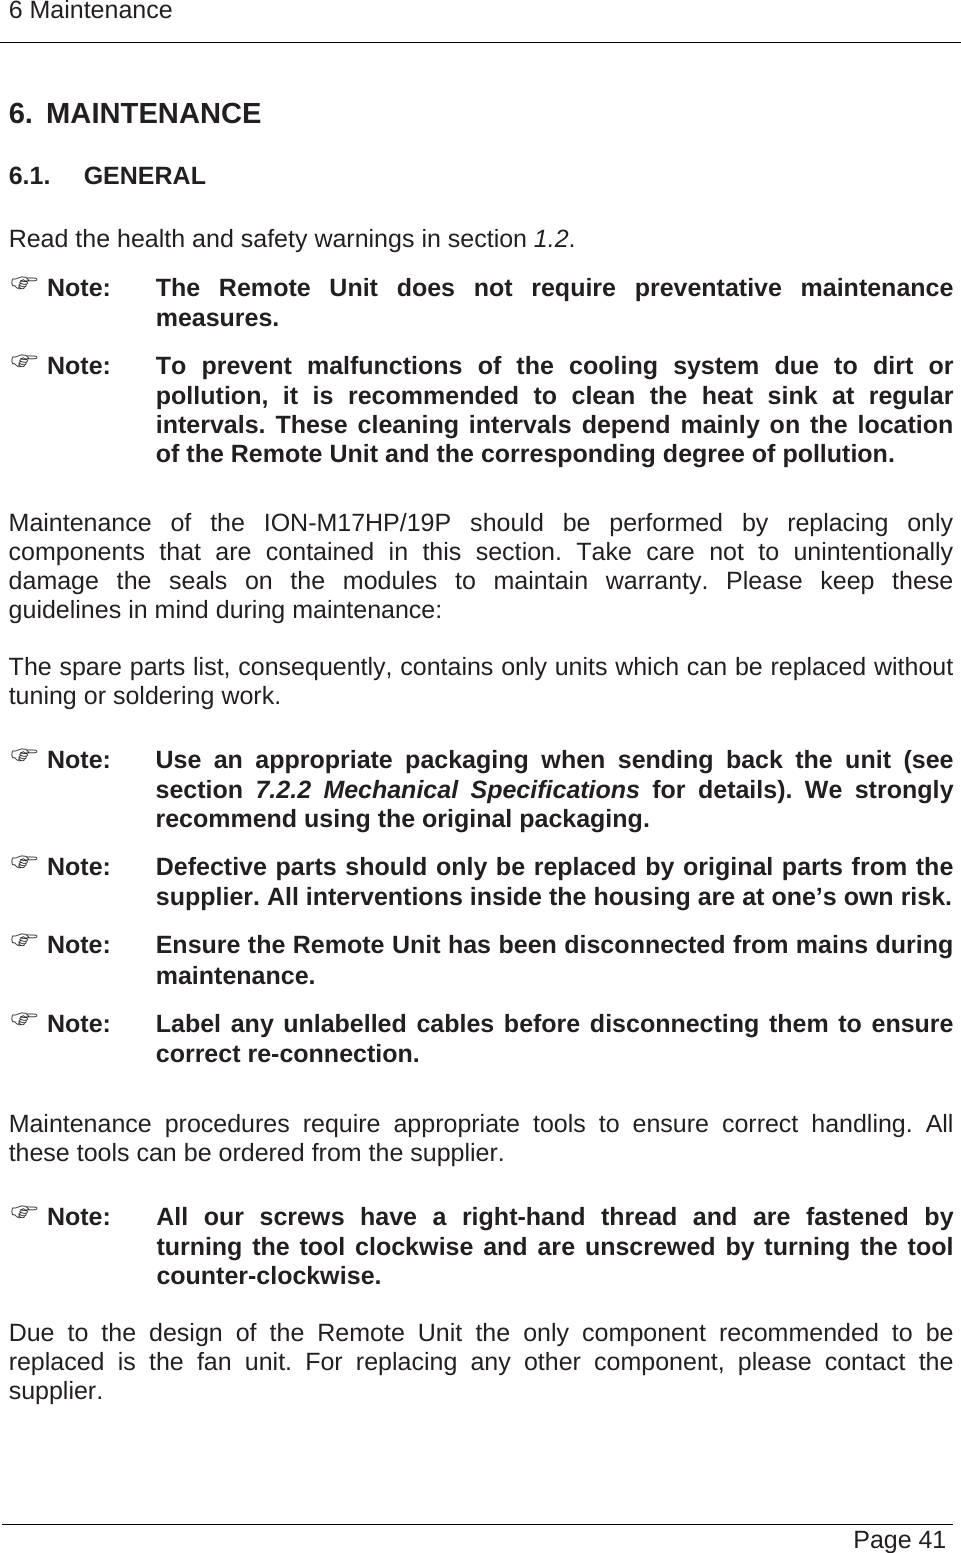 6 Maintenance   Page 41 6. MAINTENANCE 6.1.  GENERAL  Read the health and safety warnings in section 1.2. ) Note:  The Remote Unit does not require preventative maintenance measures. ) Note:  To prevent malfunctions of the cooling system due to dirt or pollution, it is recommended to clean the heat sink at regular intervals. These cleaning intervals depend mainly on the location of the Remote Unit and the corresponding degree of pollution.  Maintenance of the ION-M17HP/19P should be performed by replacing only components that are contained in this section. Take care not to unintentionally damage the seals on the modules to maintain warranty. Please keep these guidelines in mind during maintenance:  The spare parts list, consequently, contains only units which can be replaced without tuning or soldering work.  ) Note:  Use an appropriate packaging when sending back the unit (see section 7.2.2 Mechanical Specifications for details). We strongly recommend using the original packaging. ) Note:  Defective parts should only be replaced by original parts from the supplier. All interventions inside the housing are at one’s own risk. ) Note:  Ensure the Remote Unit has been disconnected from mains during maintenance. ) Note:  Label any unlabelled cables before disconnecting them to ensure correct re-connection.  Maintenance procedures require appropriate tools to ensure correct handling. All these tools can be ordered from the supplier.   ) Note:  All our screws have a right-hand thread and are fastened by turning the tool clockwise and are unscrewed by turning the tool counter-clockwise.  Due to the design of the Remote Unit the only component recommended to be replaced is the fan unit. For replacing any other component, please contact the supplier.  